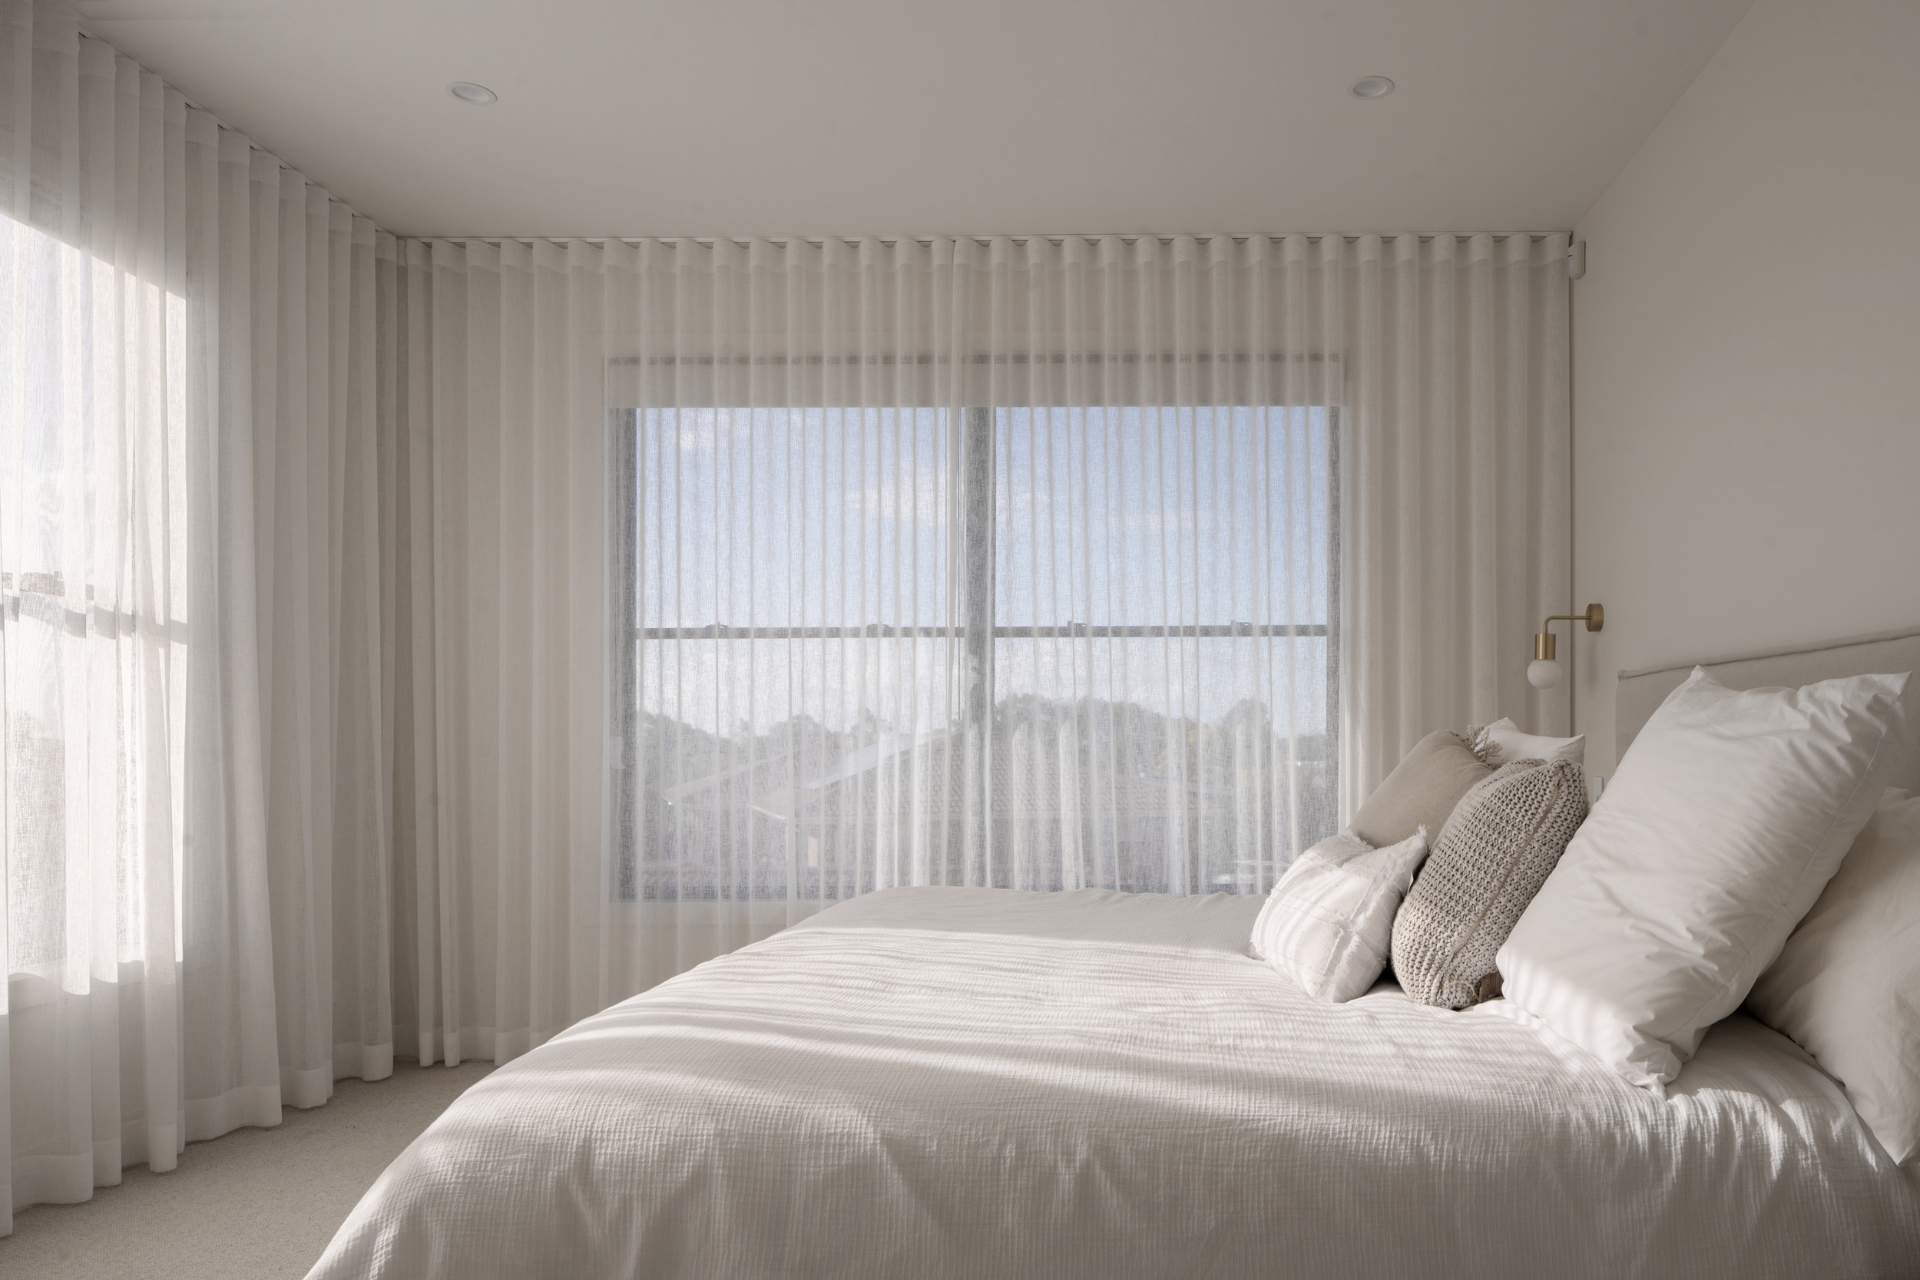 Image of the Dunvegan House | Feature Image for the How to Choose Curtain Fabric Blog from Blindo